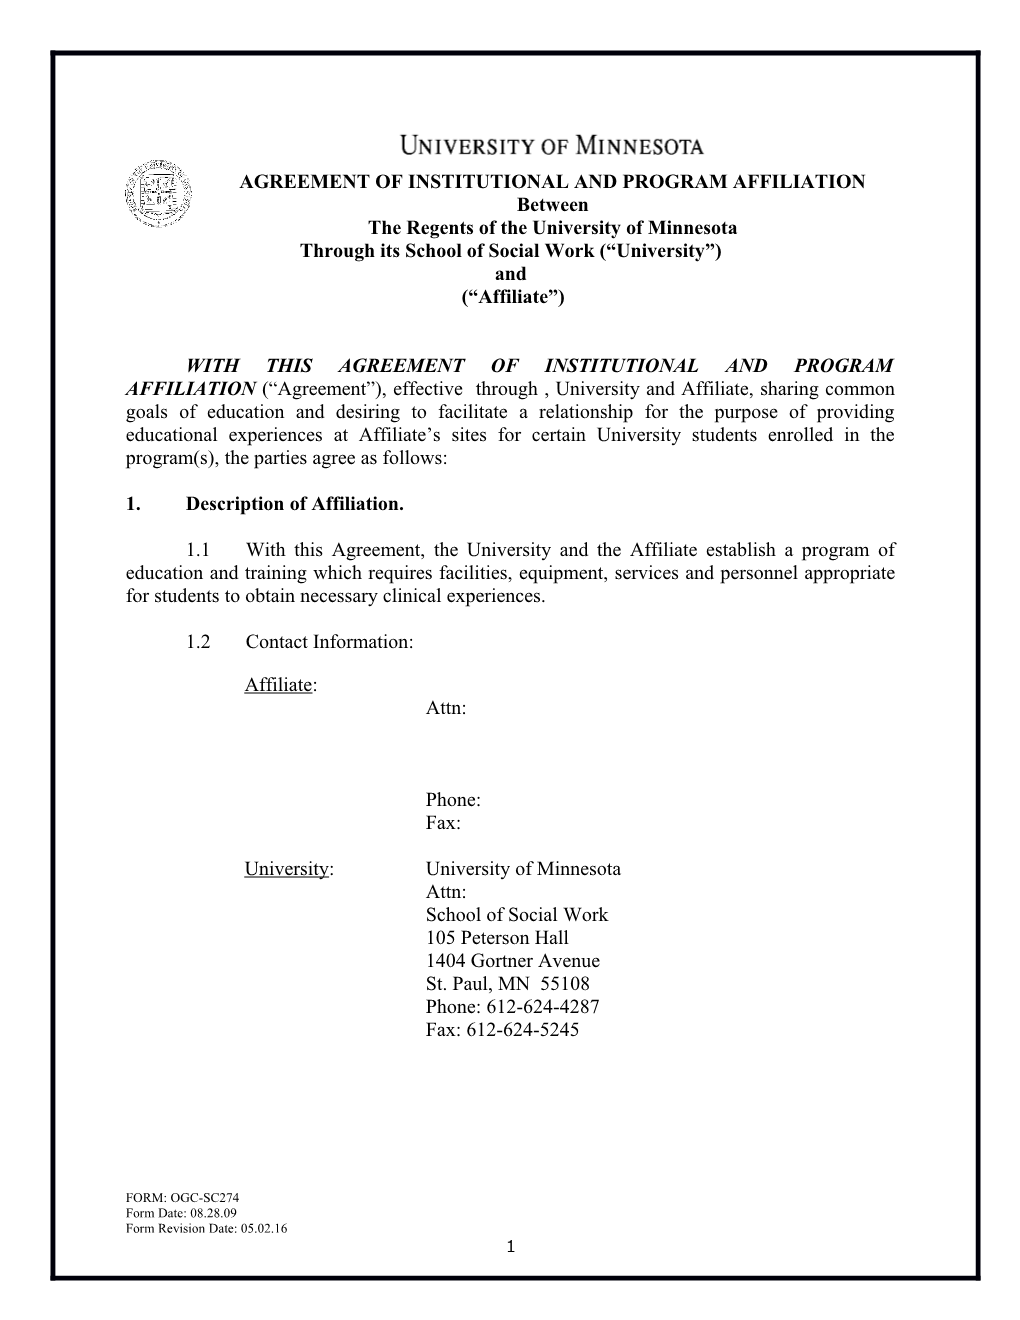 Agreement of Institutional and Program Affiliation s1